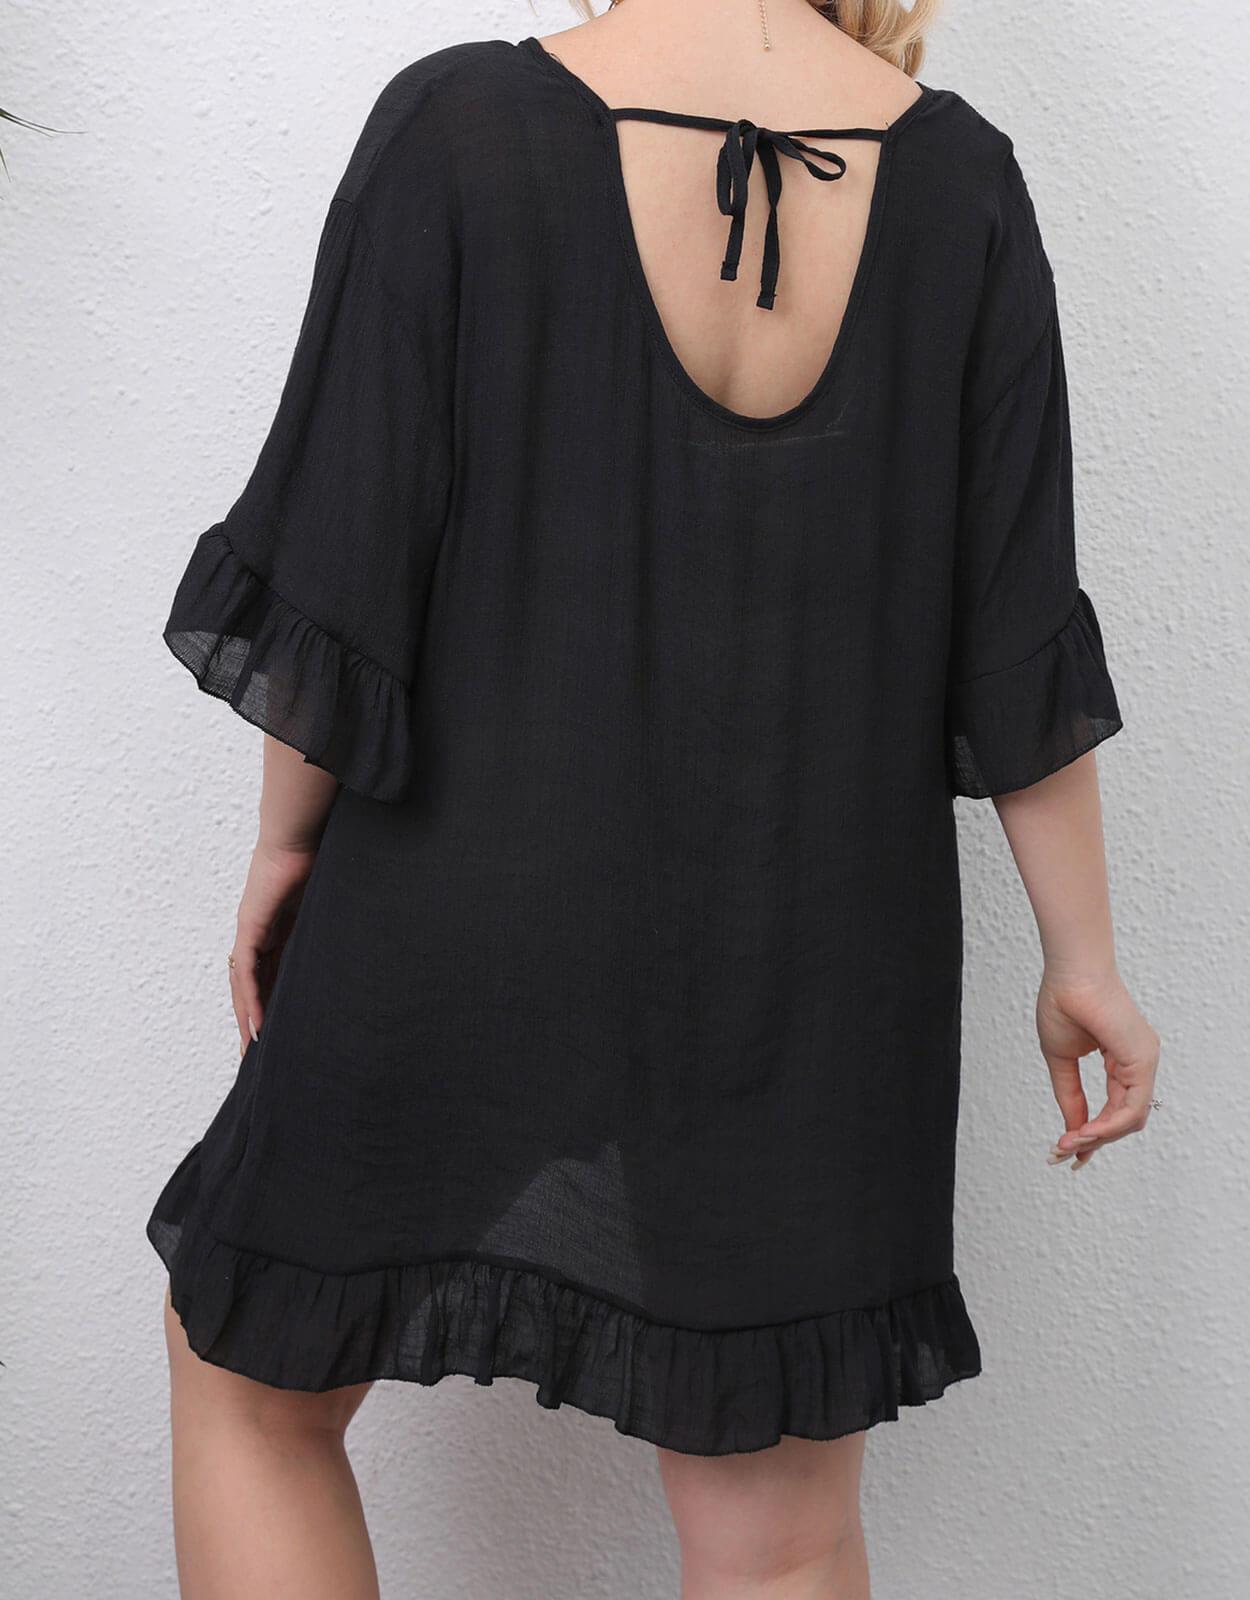 Beach Dresses Cover Ups with Ruffled Cuffs and Hem